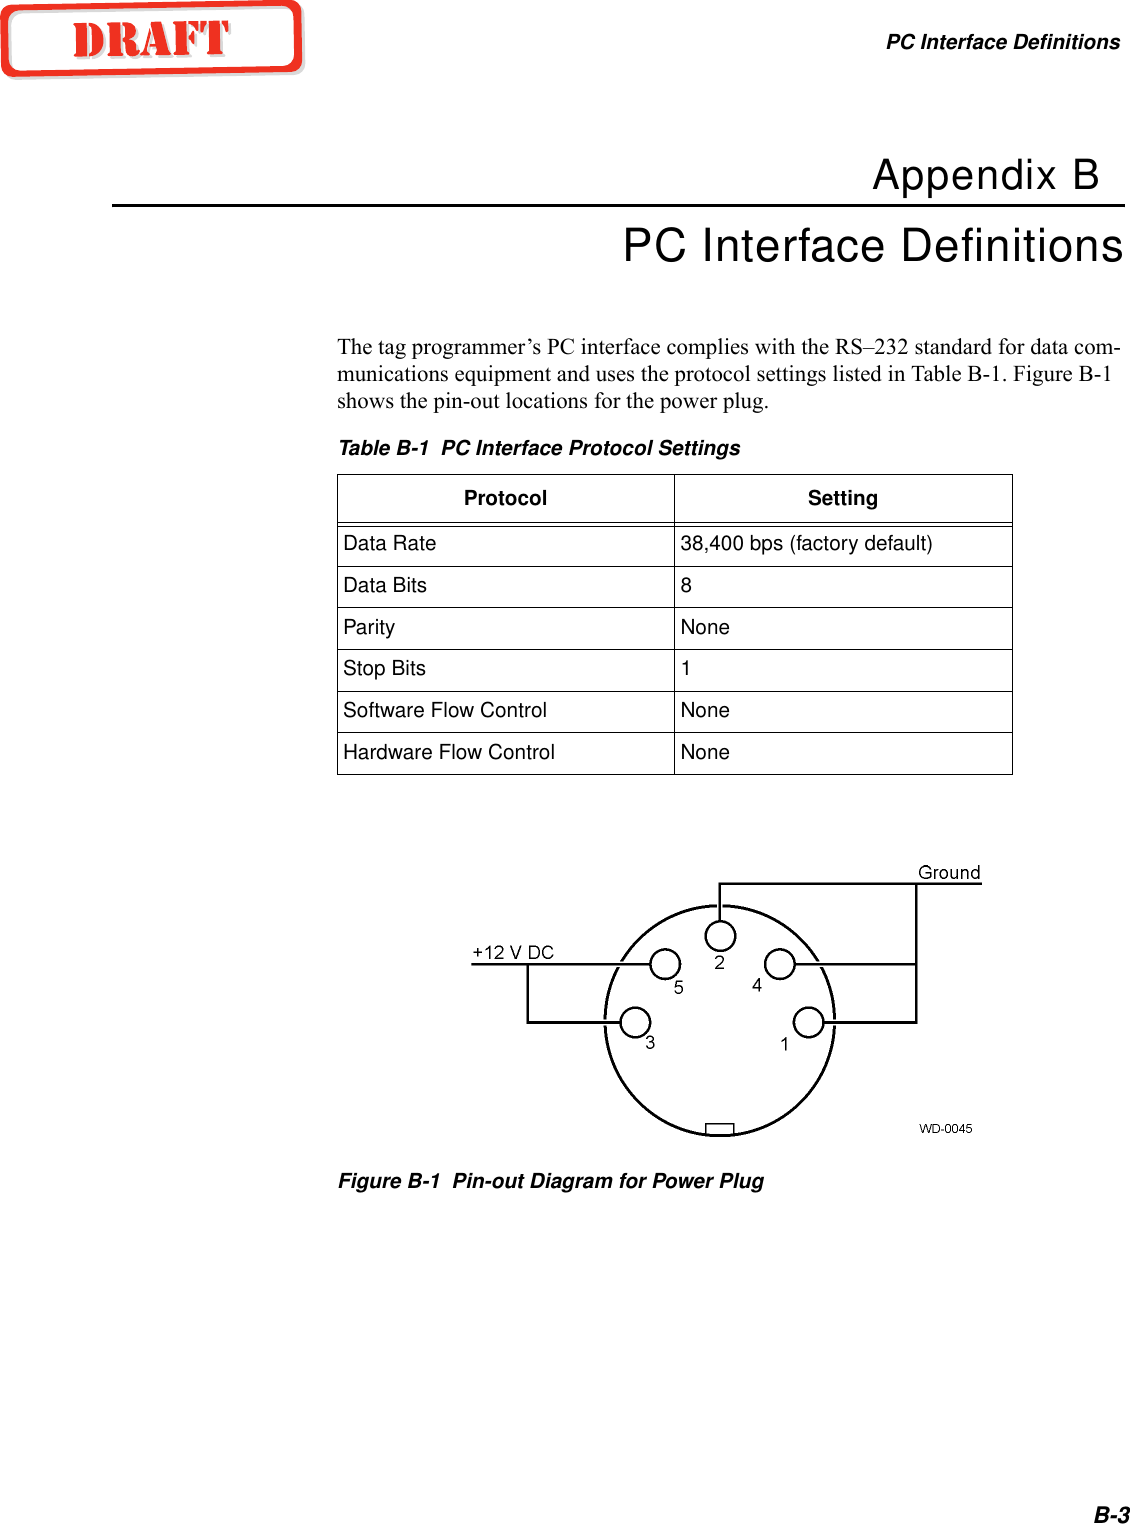 PC Interface DefinitionsB-3Appendix BPC Interface DefinitionsThe tag programmer’s PC interface complies with the RS–232 standard for data com-munications equipment and uses the protocol settings listed in Table B-1. Figure B-1 shows the pin-out locations for the power plug.Figure B-1  Pin-out Diagram for Power PlugTable B-1  PC Interface Protocol SettingsProtocol SettingData Rate 38,400 bps (factory default)Data Bits 8Parity NoneStop Bits 1Software Flow Control NoneHardware Flow Control None